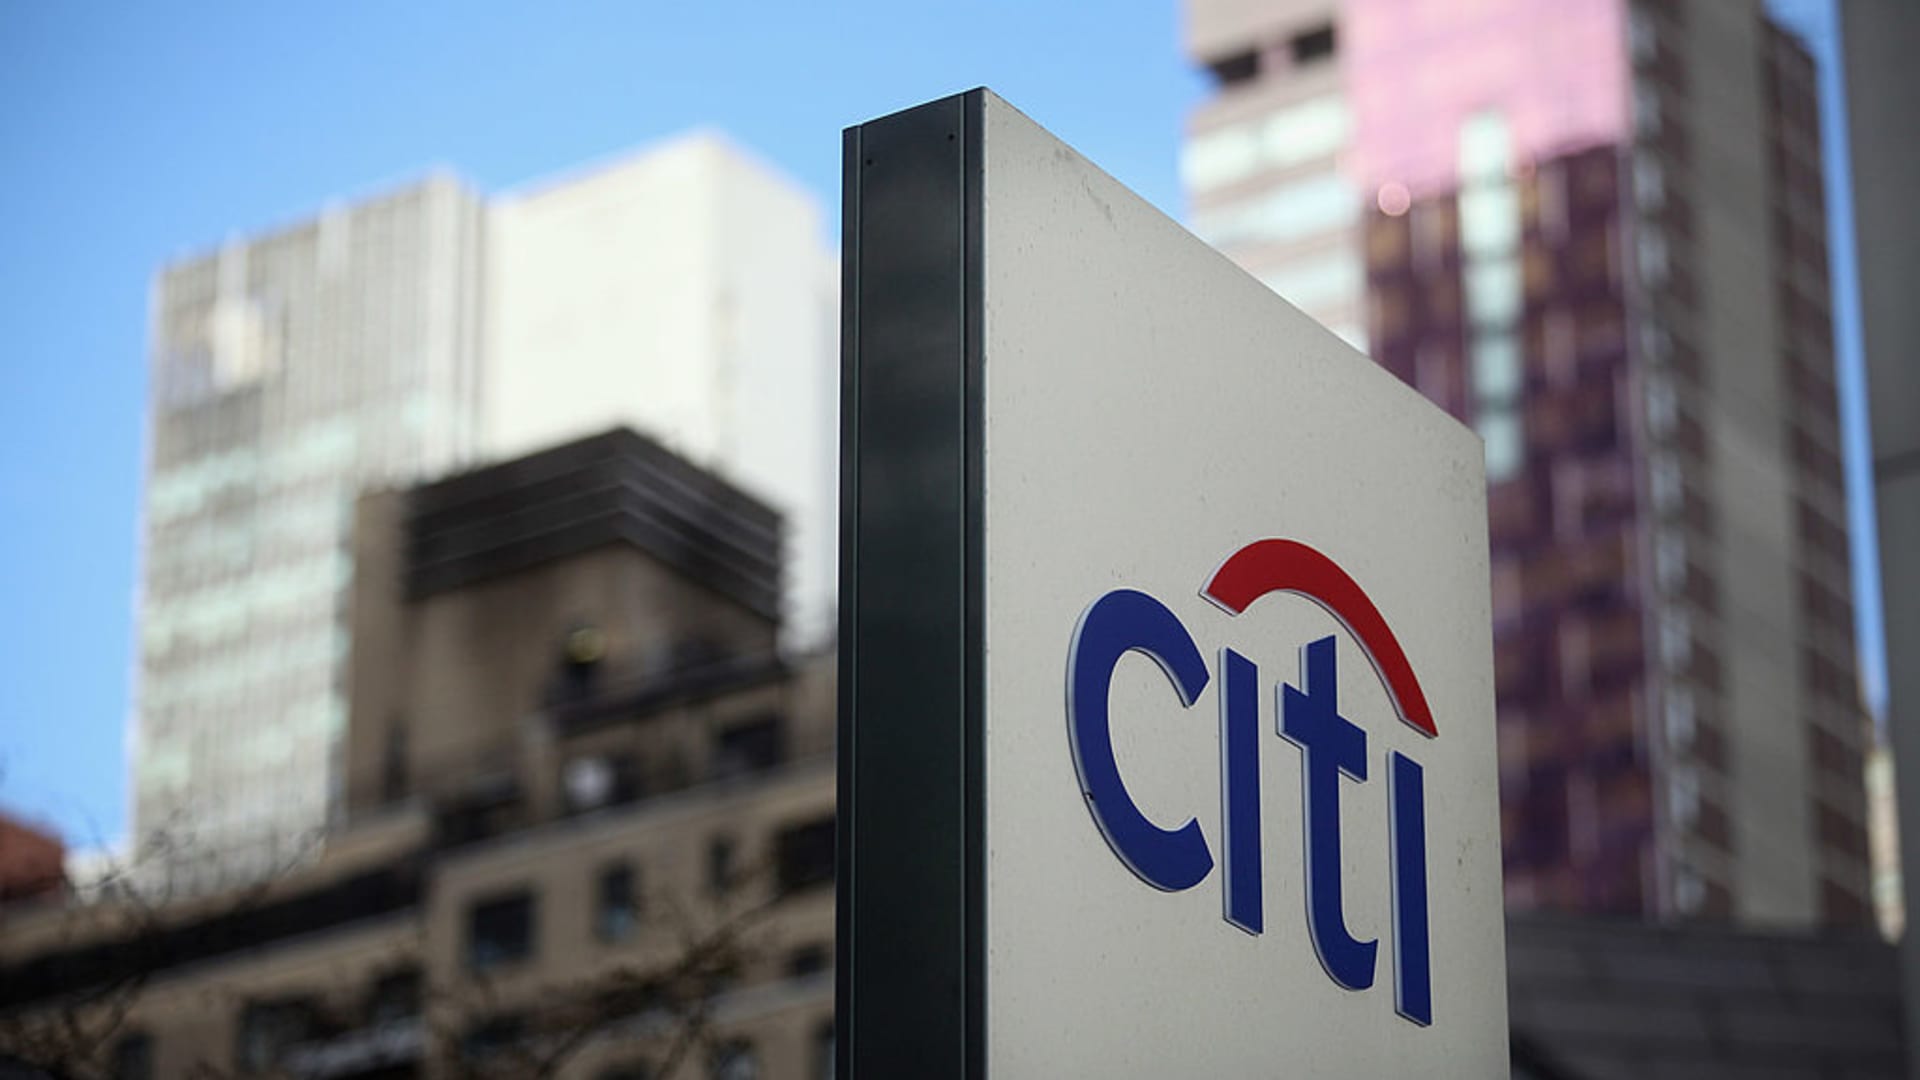 Credit Suisse downgrades Citi to neutral, says the bank has limited upside